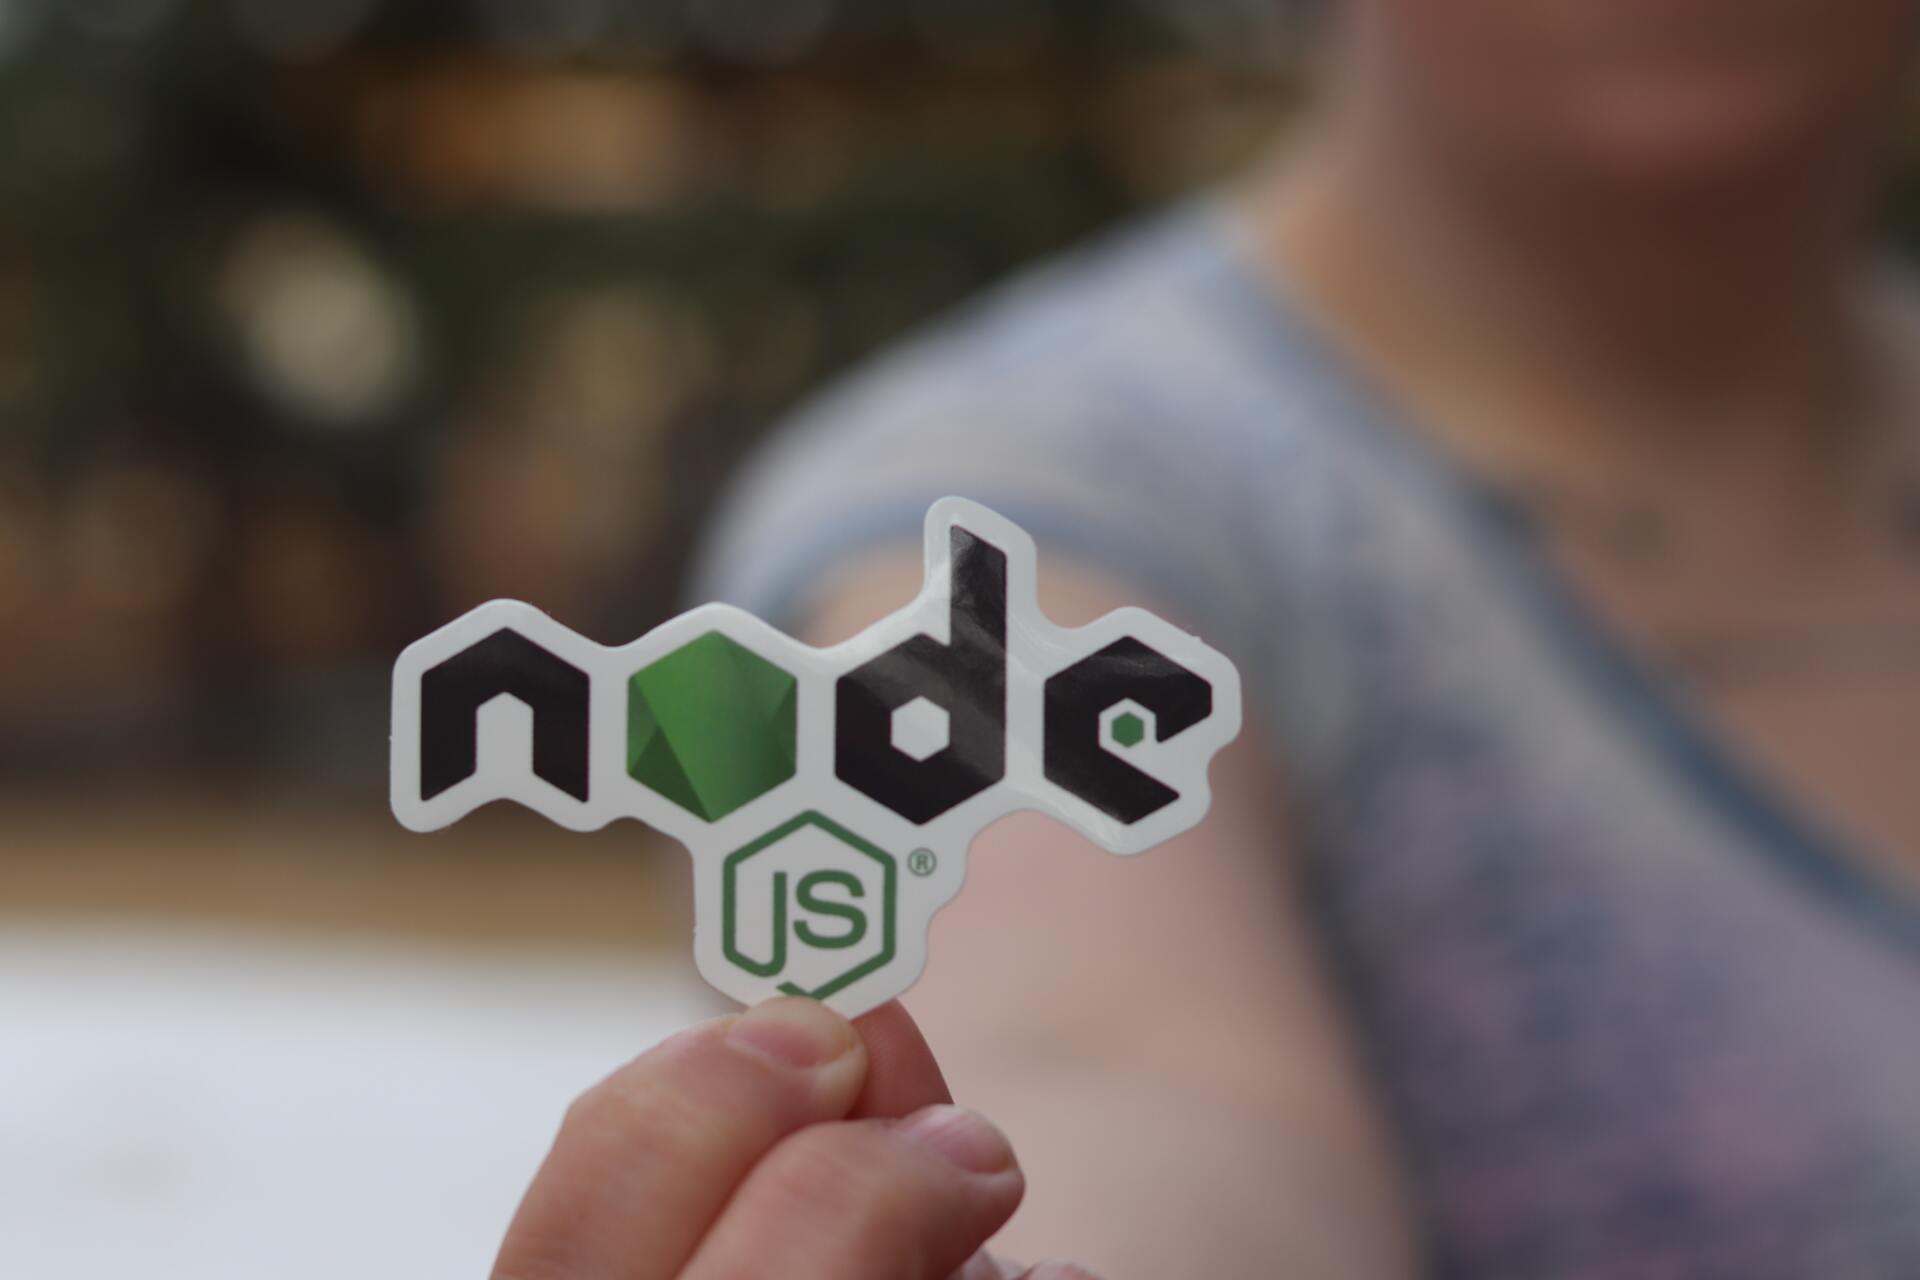 WHY NODEJS IS THE BEST TECHNOLOGY FOR WEB APPLICATION DEVELOPMENT